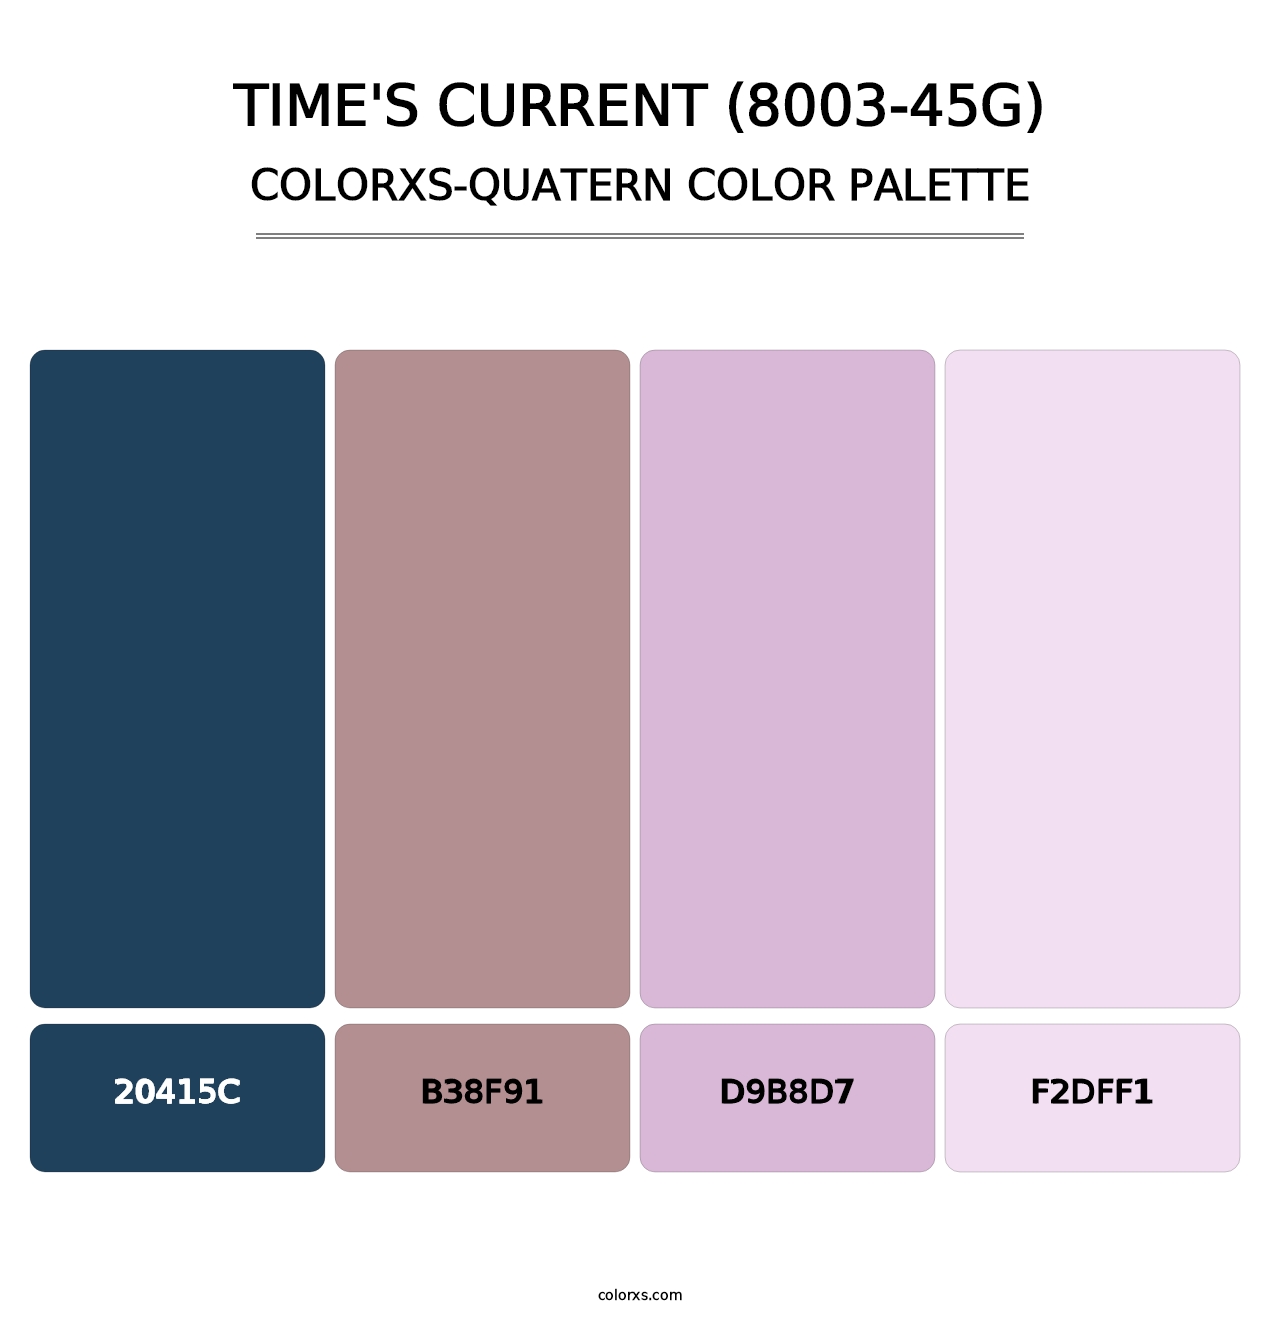 Time's Current (8003-45G) - Colorxs Quatern Palette